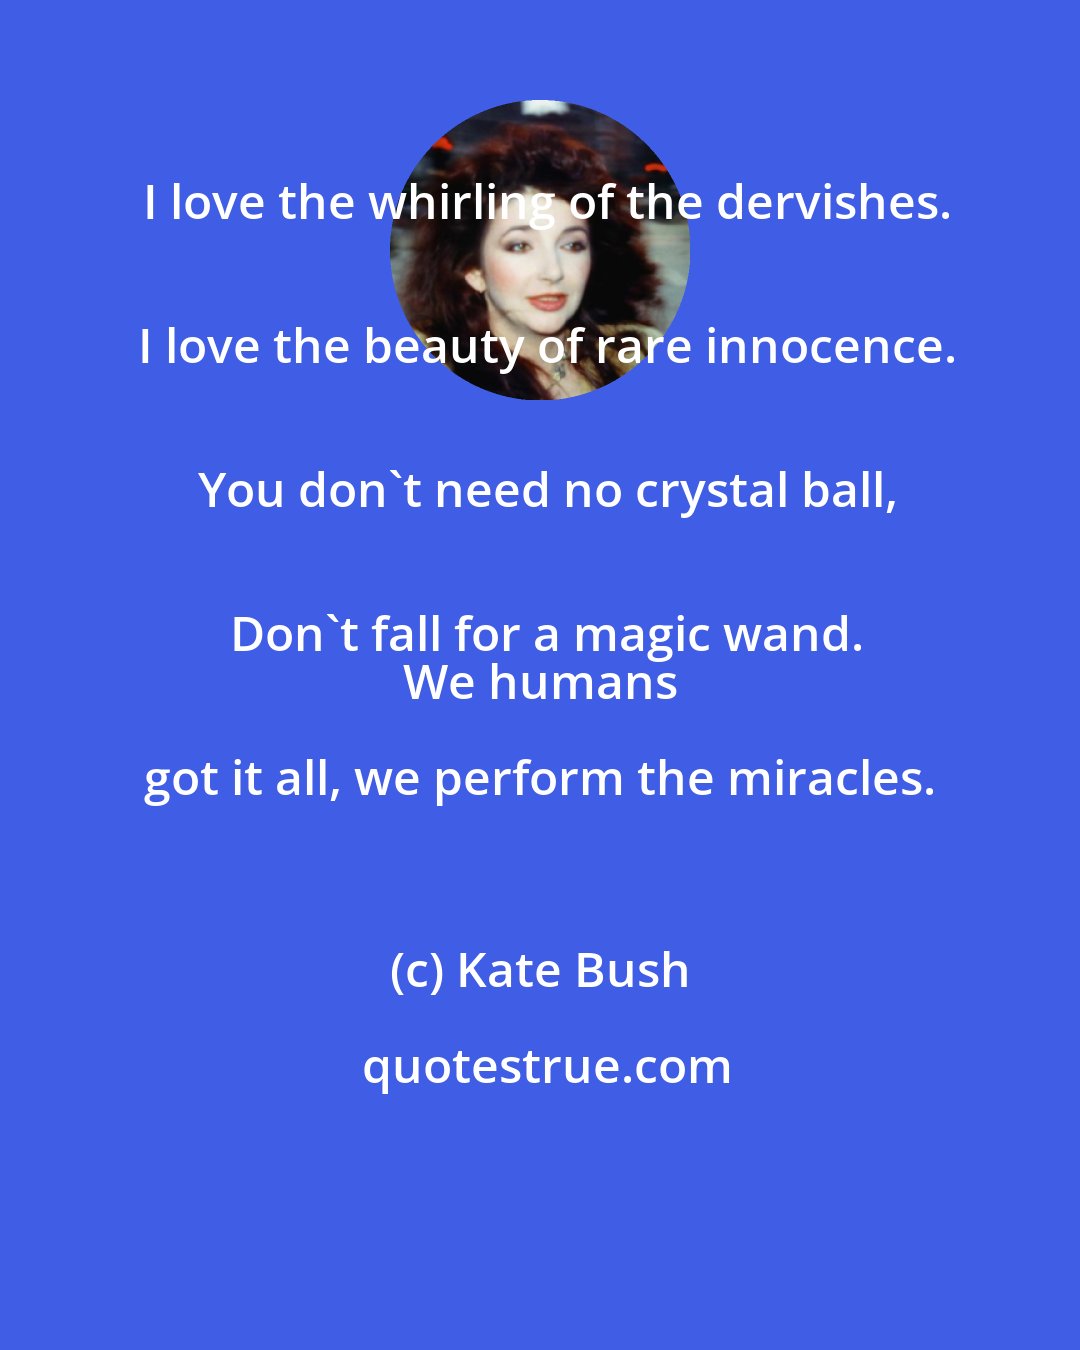 Kate Bush: I love the whirling of the dervishes.
 I love the beauty of rare innocence.
 You don't need no crystal ball,
 Don't fall for a magic wand.
 We humans got it all, we perform the miracles.